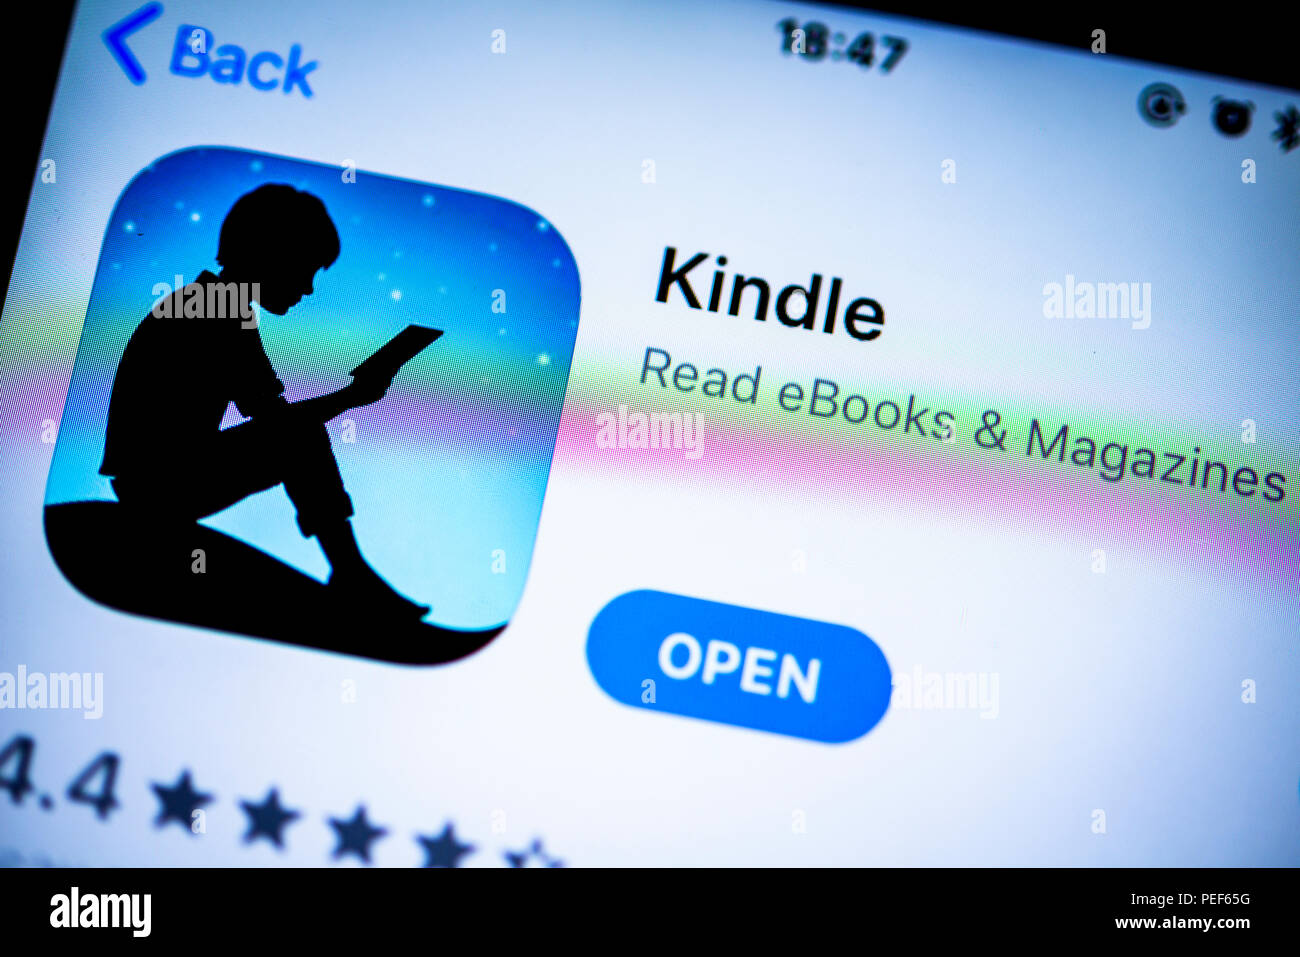 Amazon Kindle app, ebooks, in the Apple App Store, app icon, display, iPhone, iOS, smartphone, close-up, Germany Stock Photo